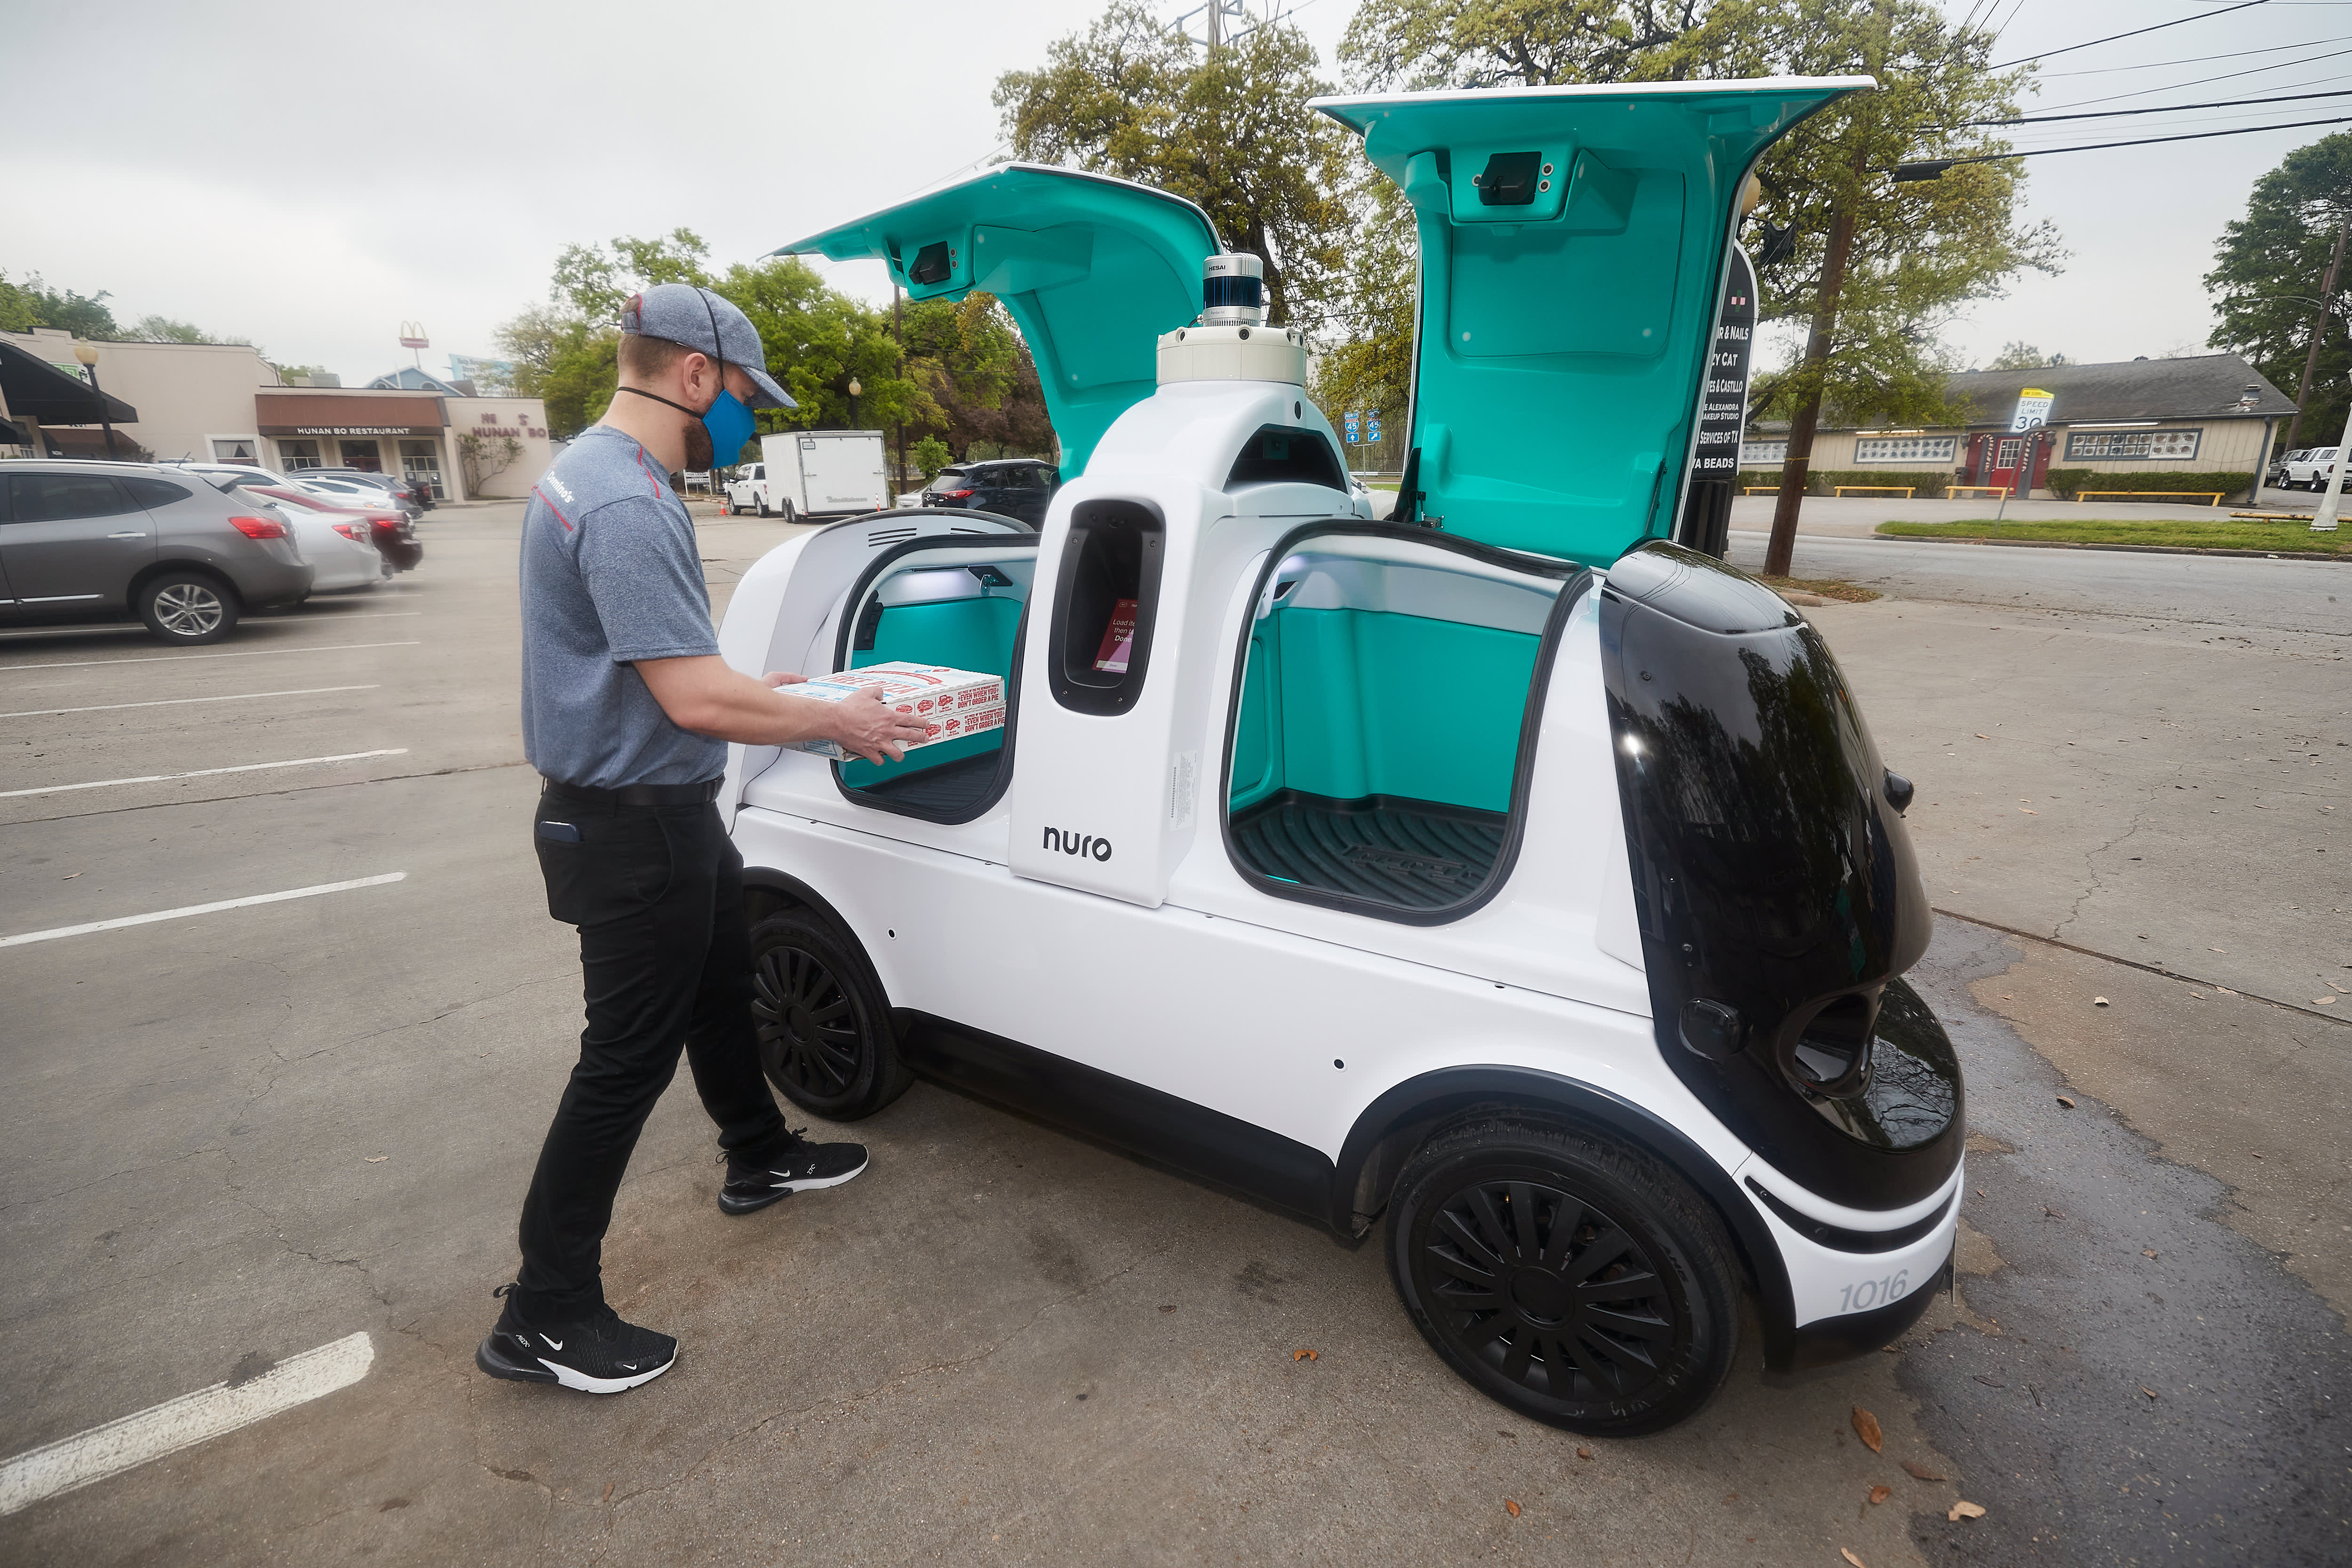 Domino’s Pizza pilots driverless delivery with Nuro in Houston